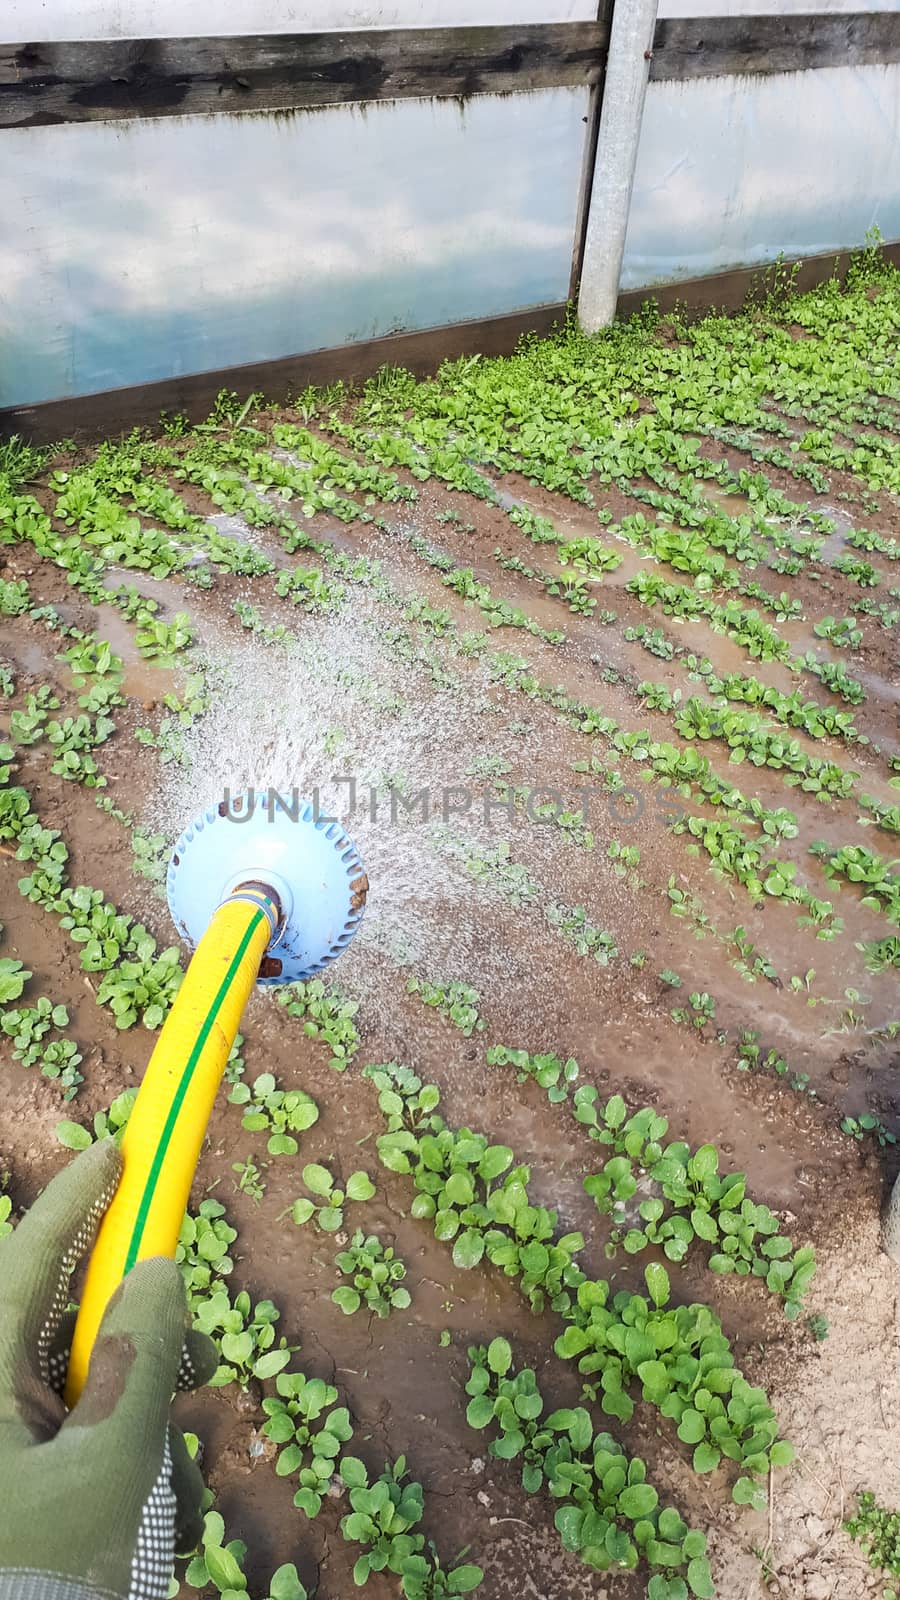 Watering cabbage seedlings from a hose. Watering in the greenhouse.